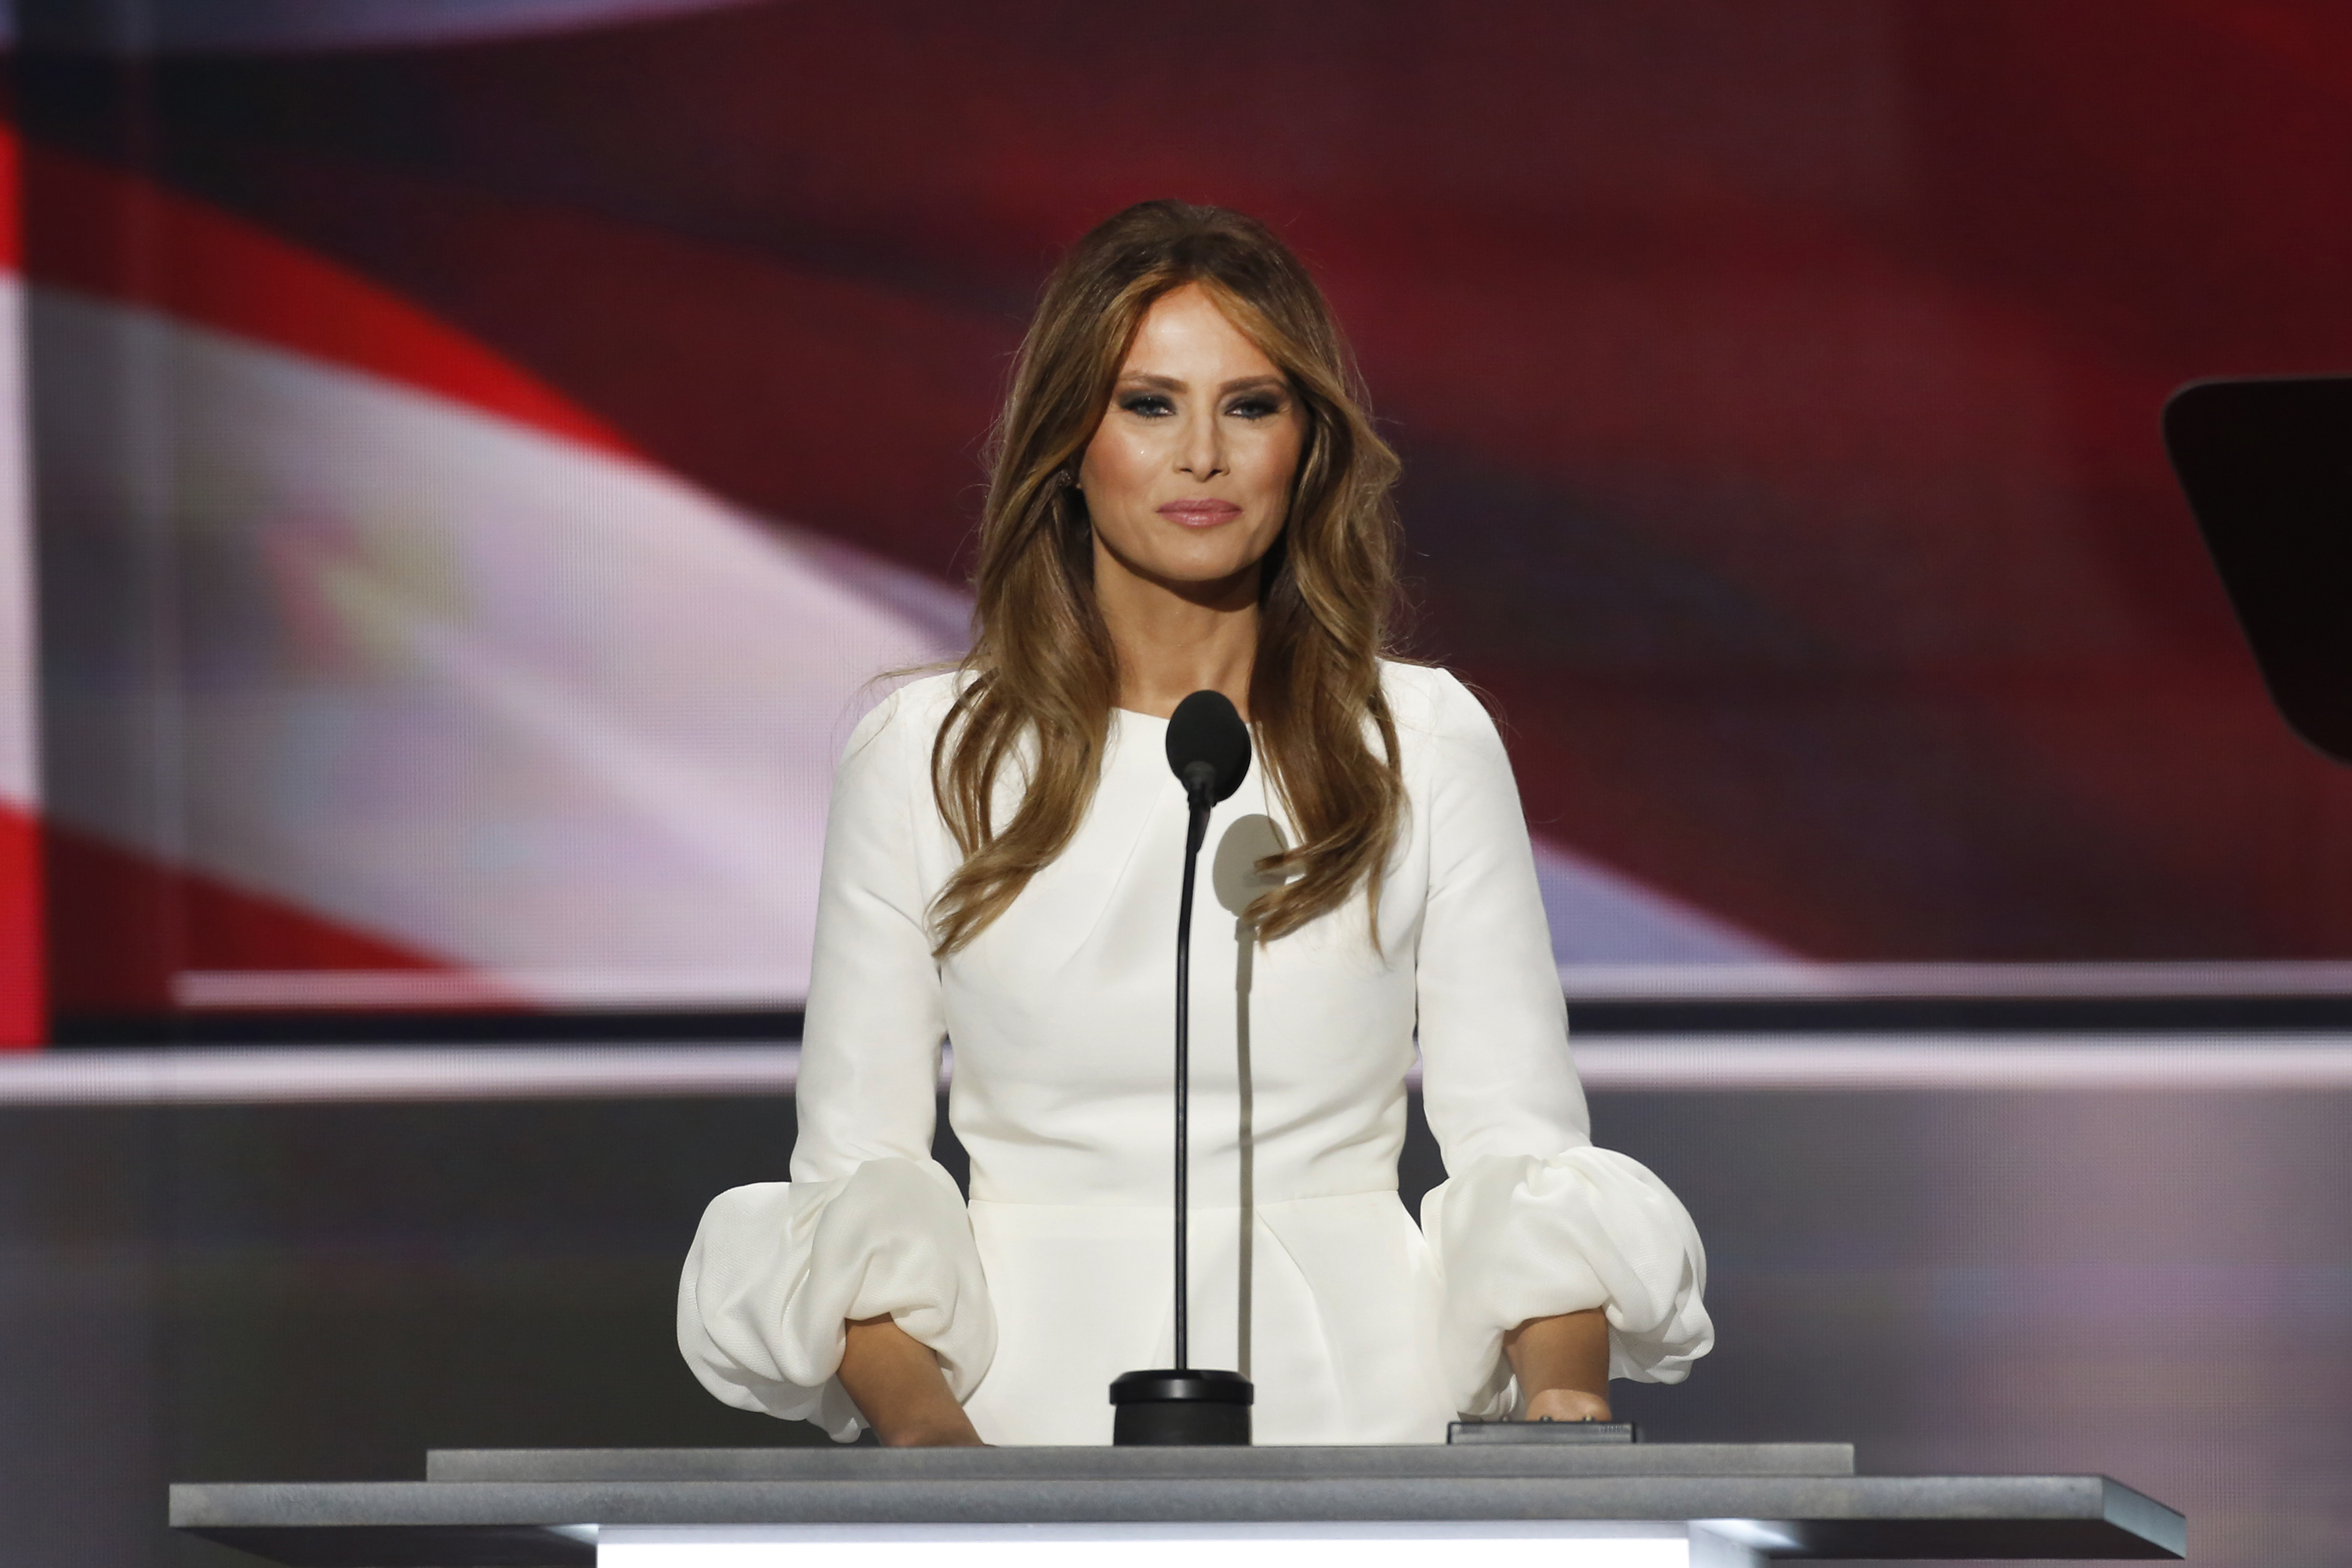 Melania Trump speaks during the Republican National Convention in Cleveland, Ohio, on July 18, 2016.